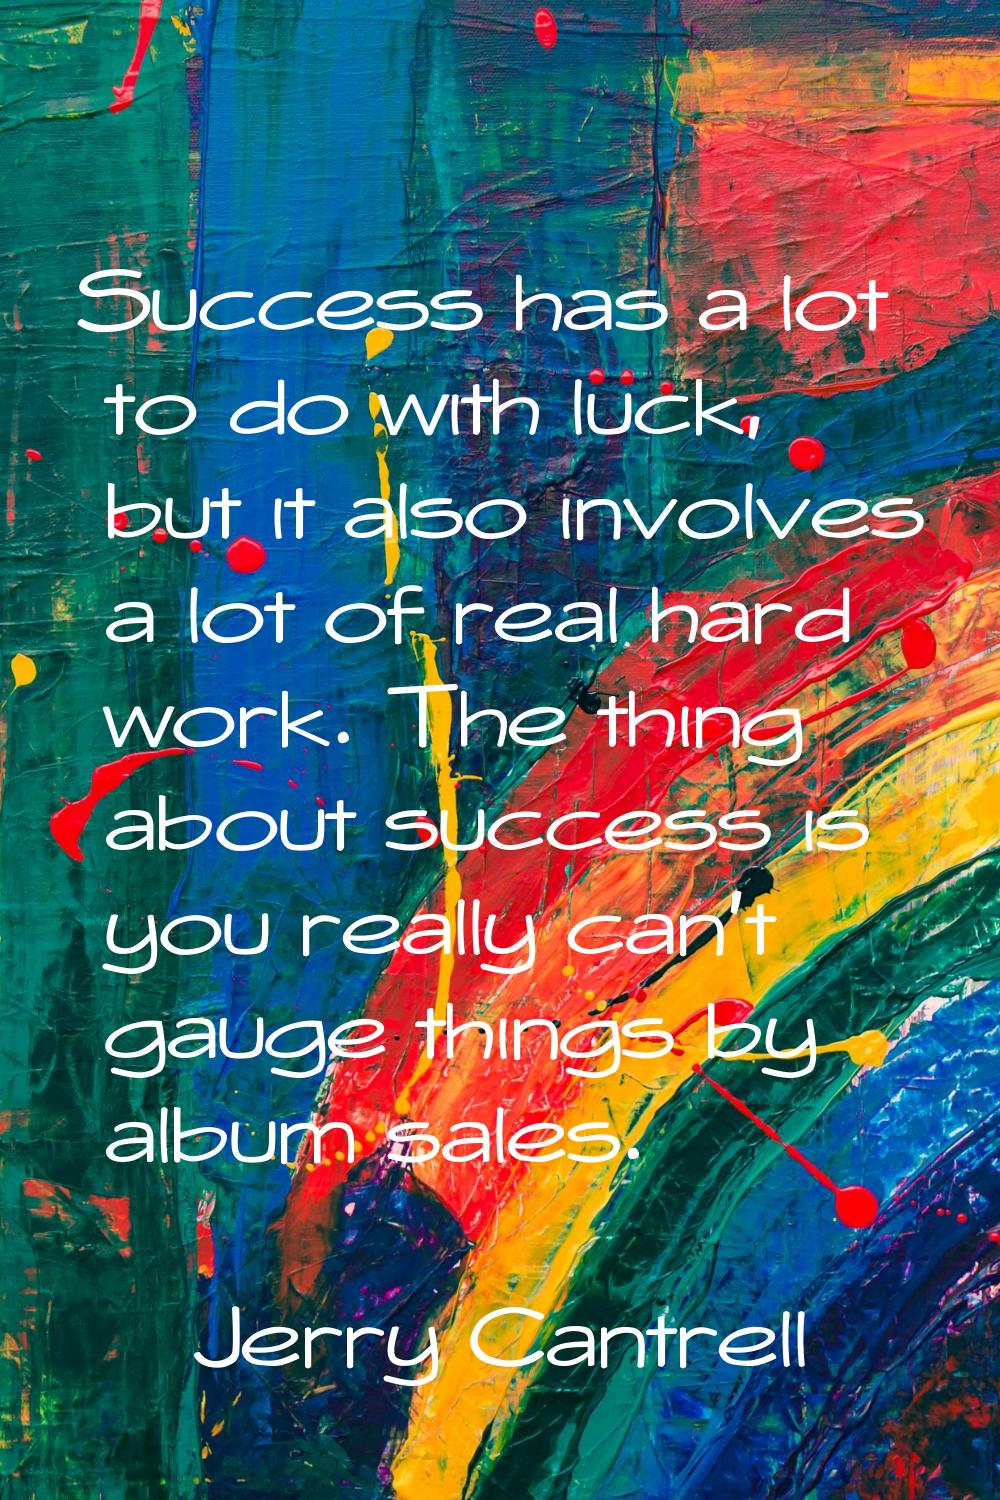 Success has a lot to do with luck, but it also involves a lot of real hard work. The thing about su